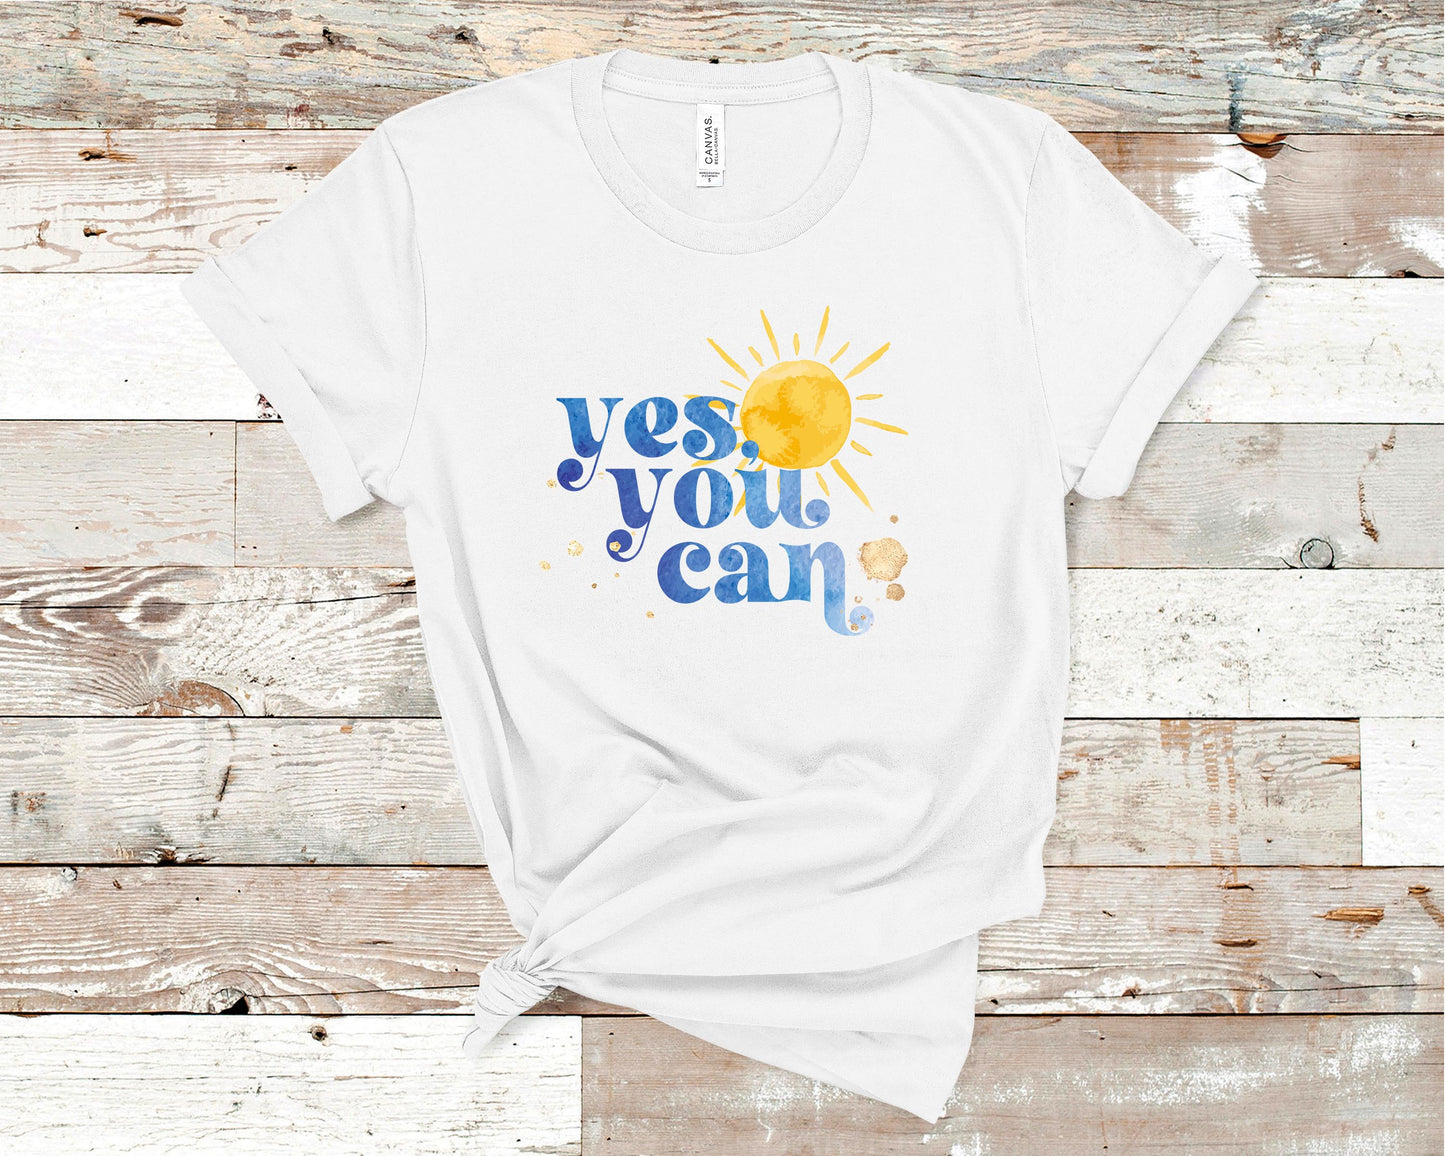 Yes You Can - Motivational